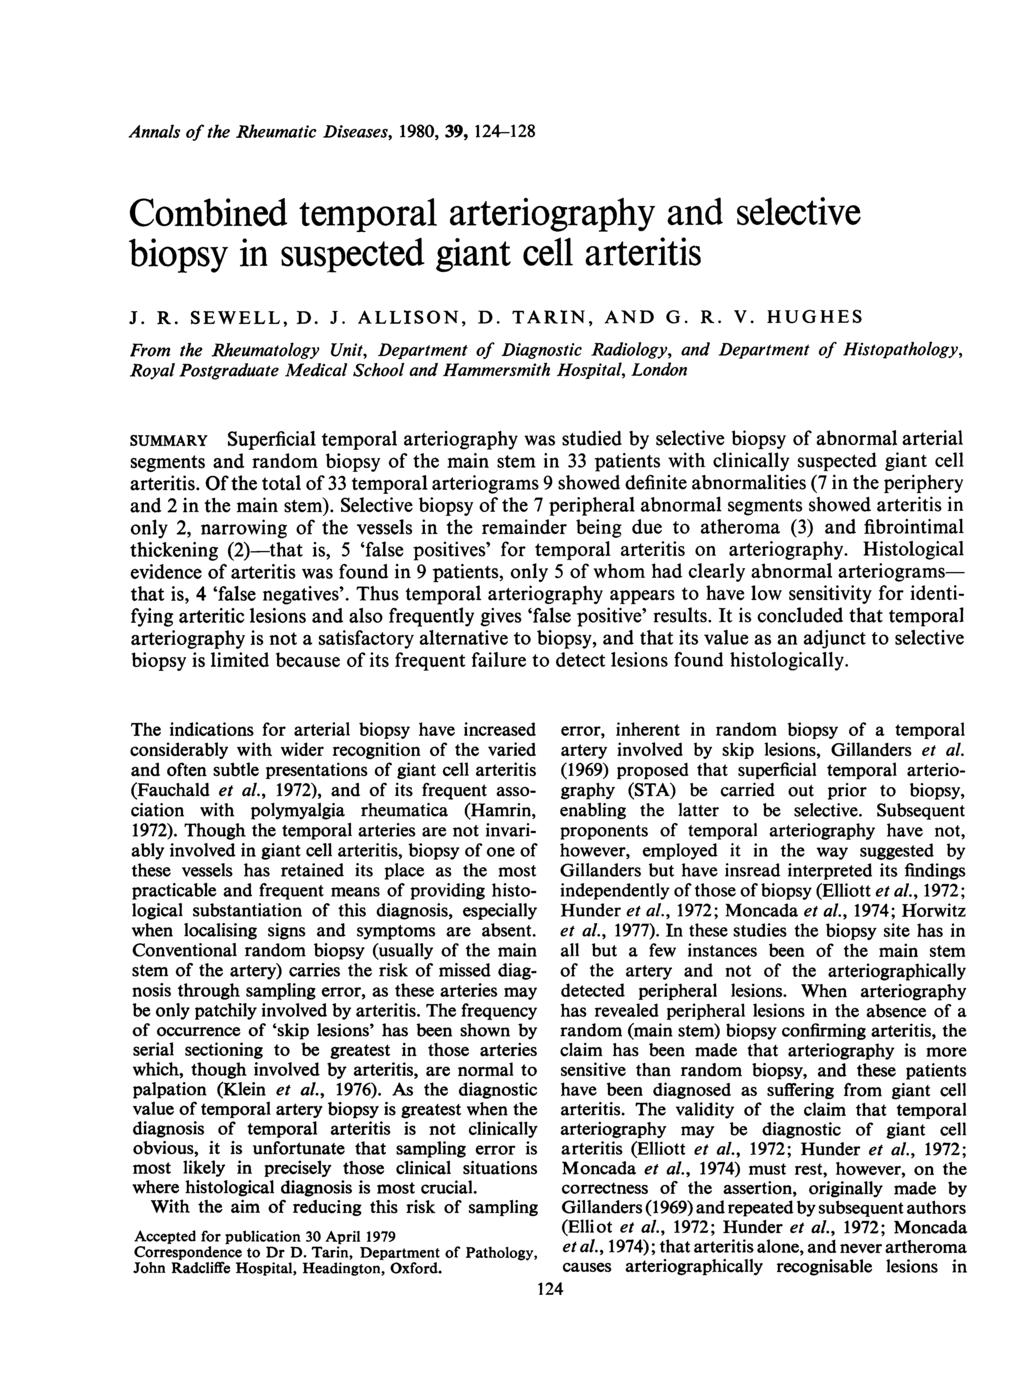 Annals of the Rheumatic Diseases, 1980, 39, 124-128 Combined temporal arteriography and selective biopsy in suspected giant cell arteritis J. R. SEWELL, D. J. ALLISON, D. TARIN, AND G. R. V.